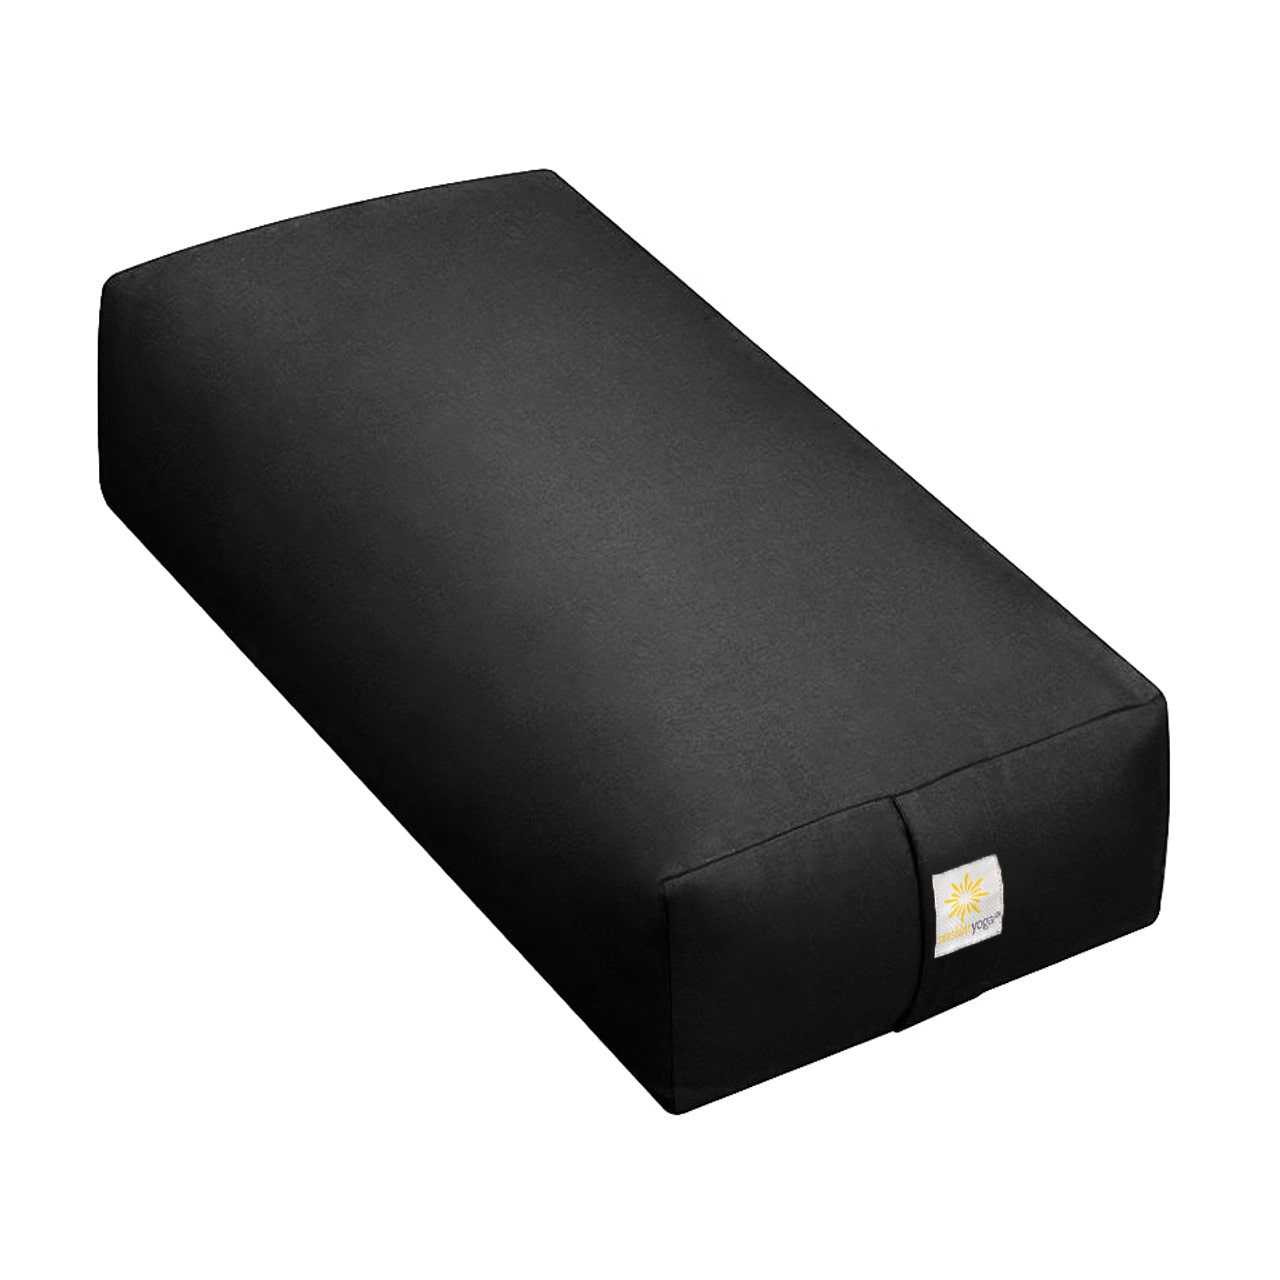 https://cdn11.bigcommerce.com/s-zu9c0wie59/images/stencil/1280x1280/products/721/5071/Deluxe-Firm-Large-Rectangular-Yoga-Bolster-24L-x-6H-x-12W_4323__95458.1710437271.jpg?c=2